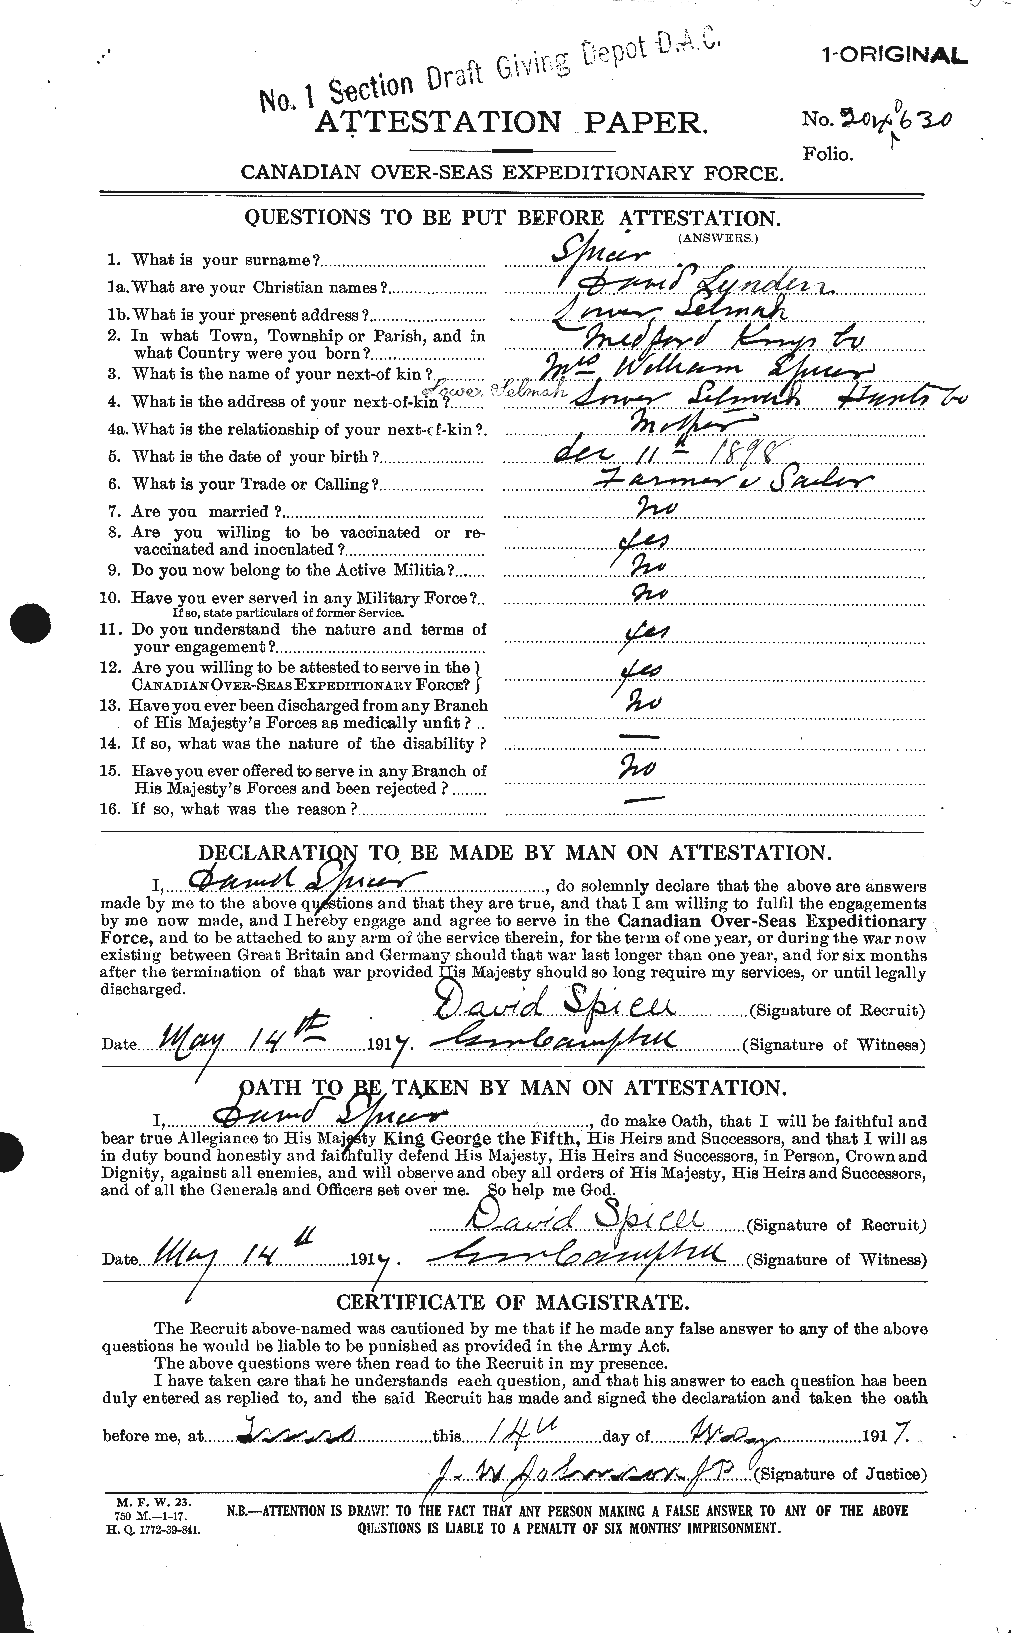 Personnel Records of the First World War - CEF 113905a